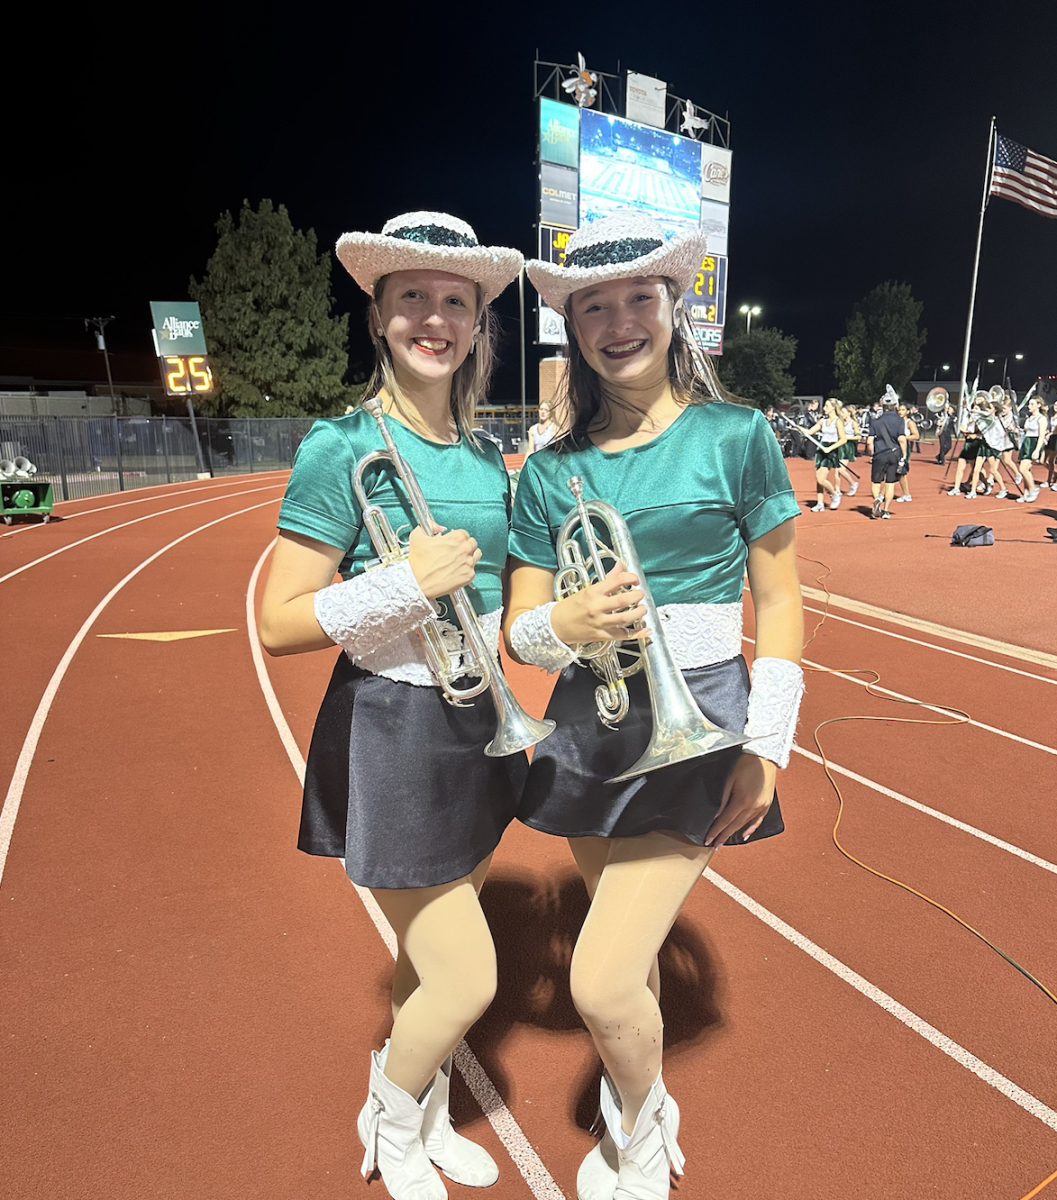 In+their+Talonettes+uniforms%2C+sophomores+Abigail+McGregor+and+Katie+Lynn+stand+with+the+band+at+the+Rockwall+football+game.+McGregor+and+Lynn+sit+and+play+with+the+band+during+the+game+but+perform+with+the+Talonettes+during+halftime.+The+Prosper+football+team+lost+this+non-district+matchup%2C+47-41.